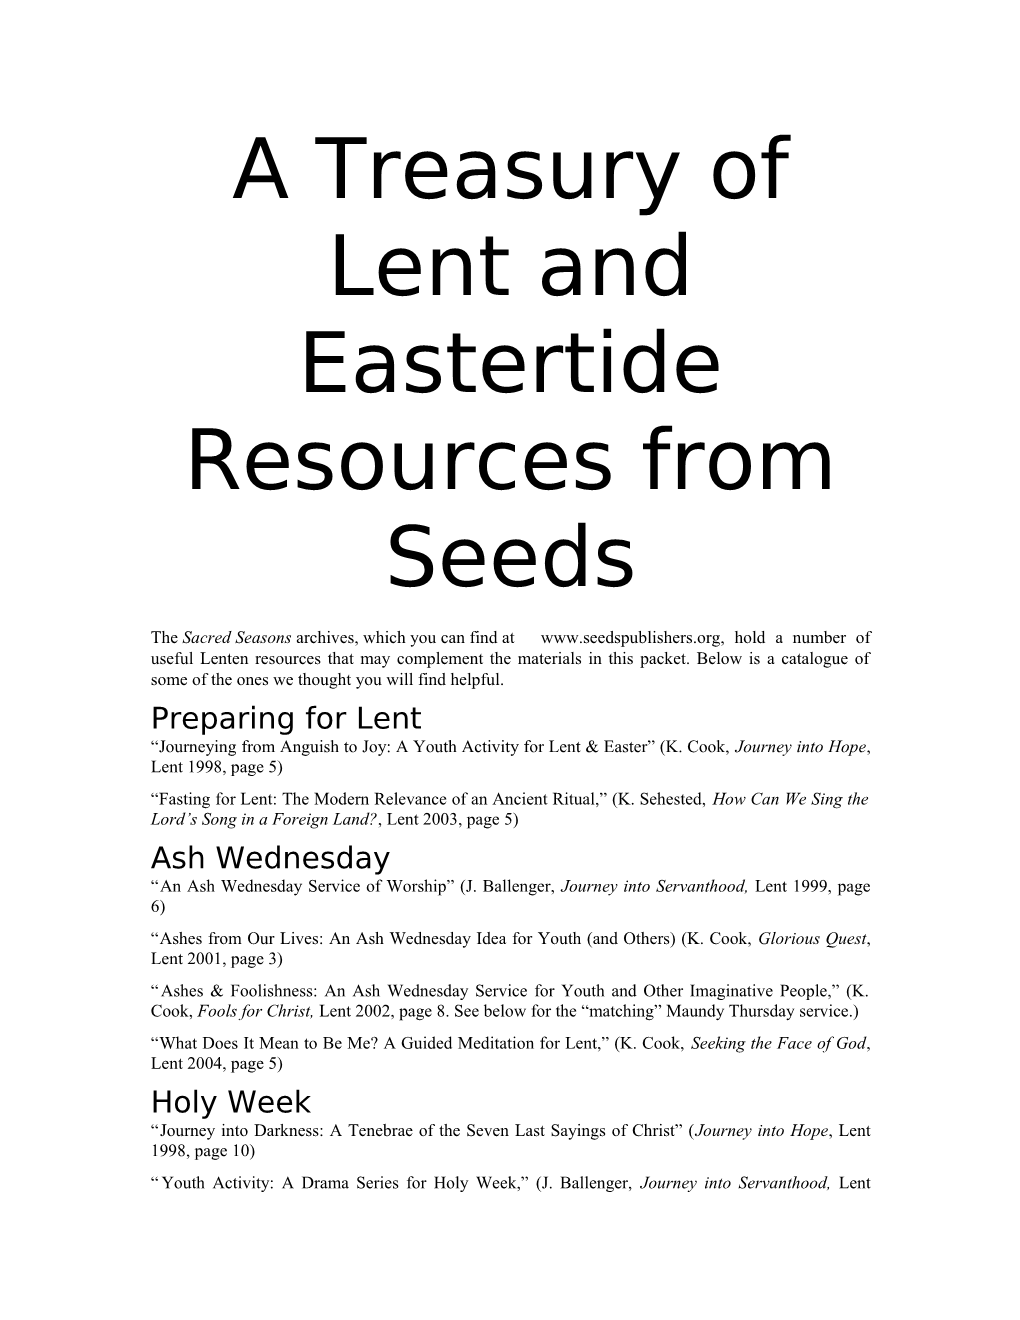 A Treasury of Lent and Eastertide Resources from Seeds